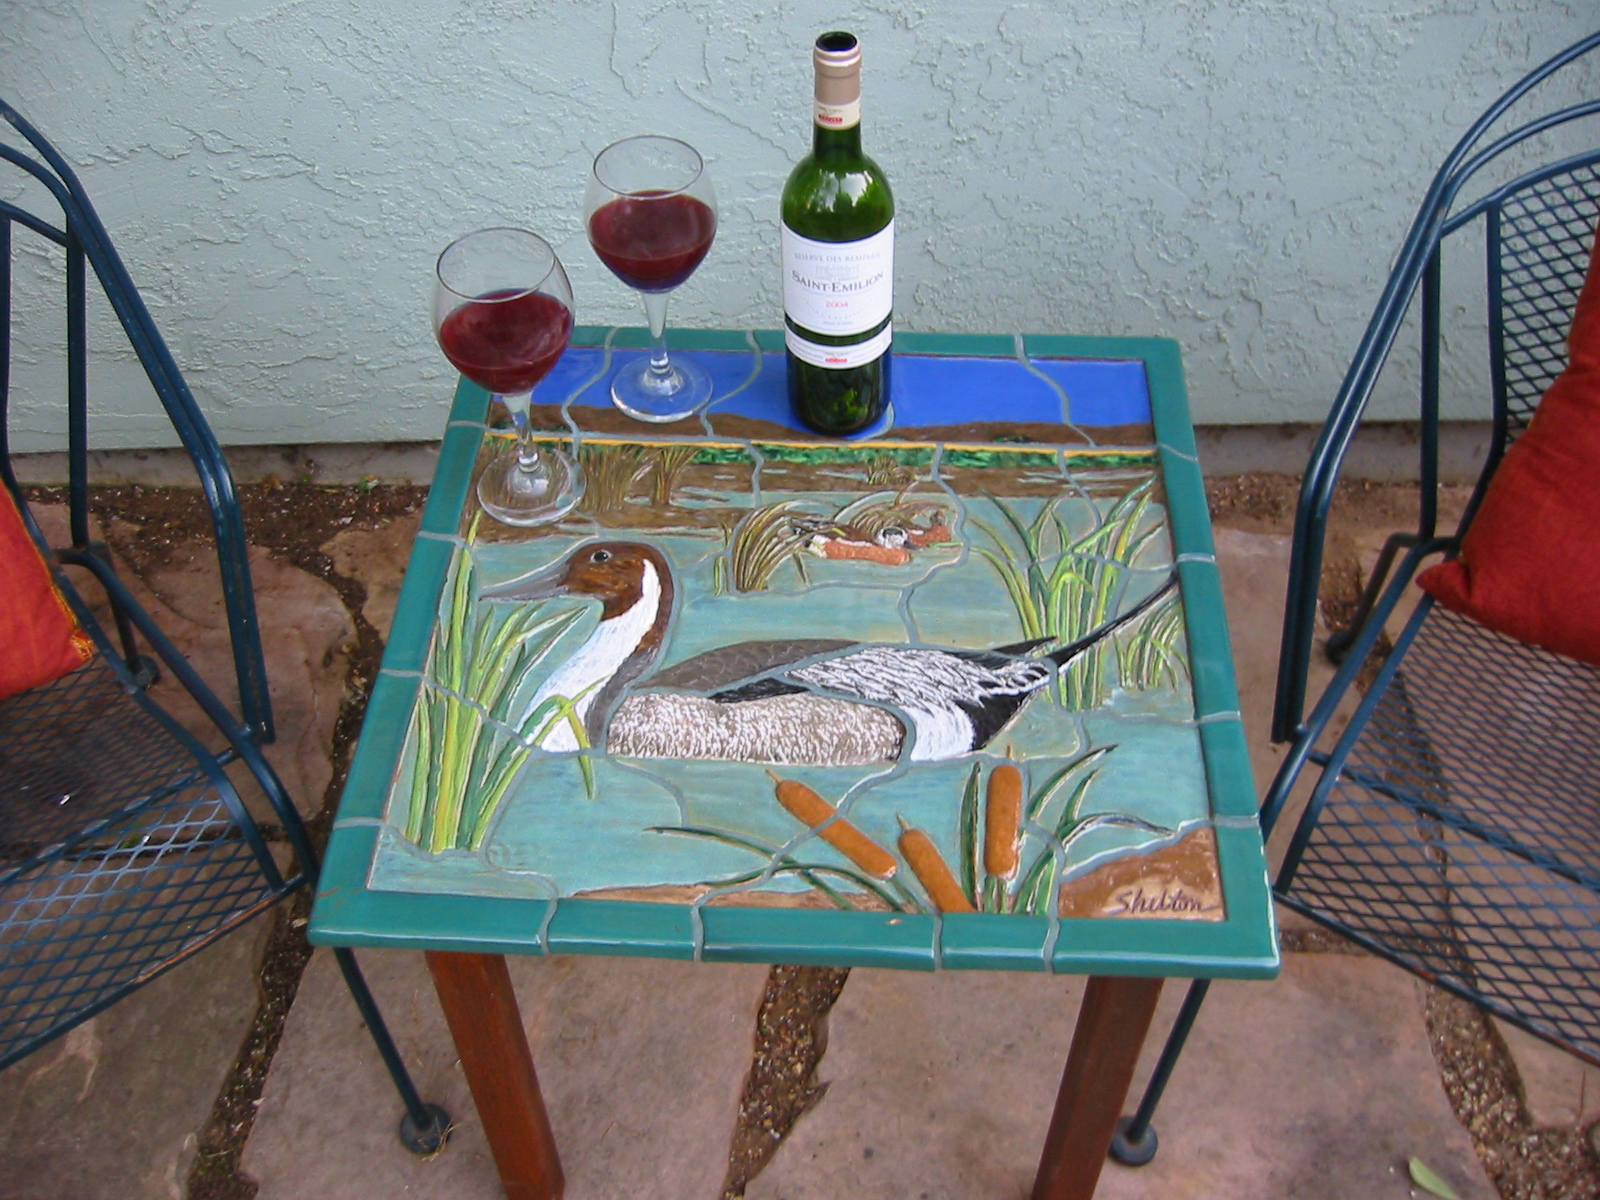 Carved Ceramic Table with Pintail Duck Design